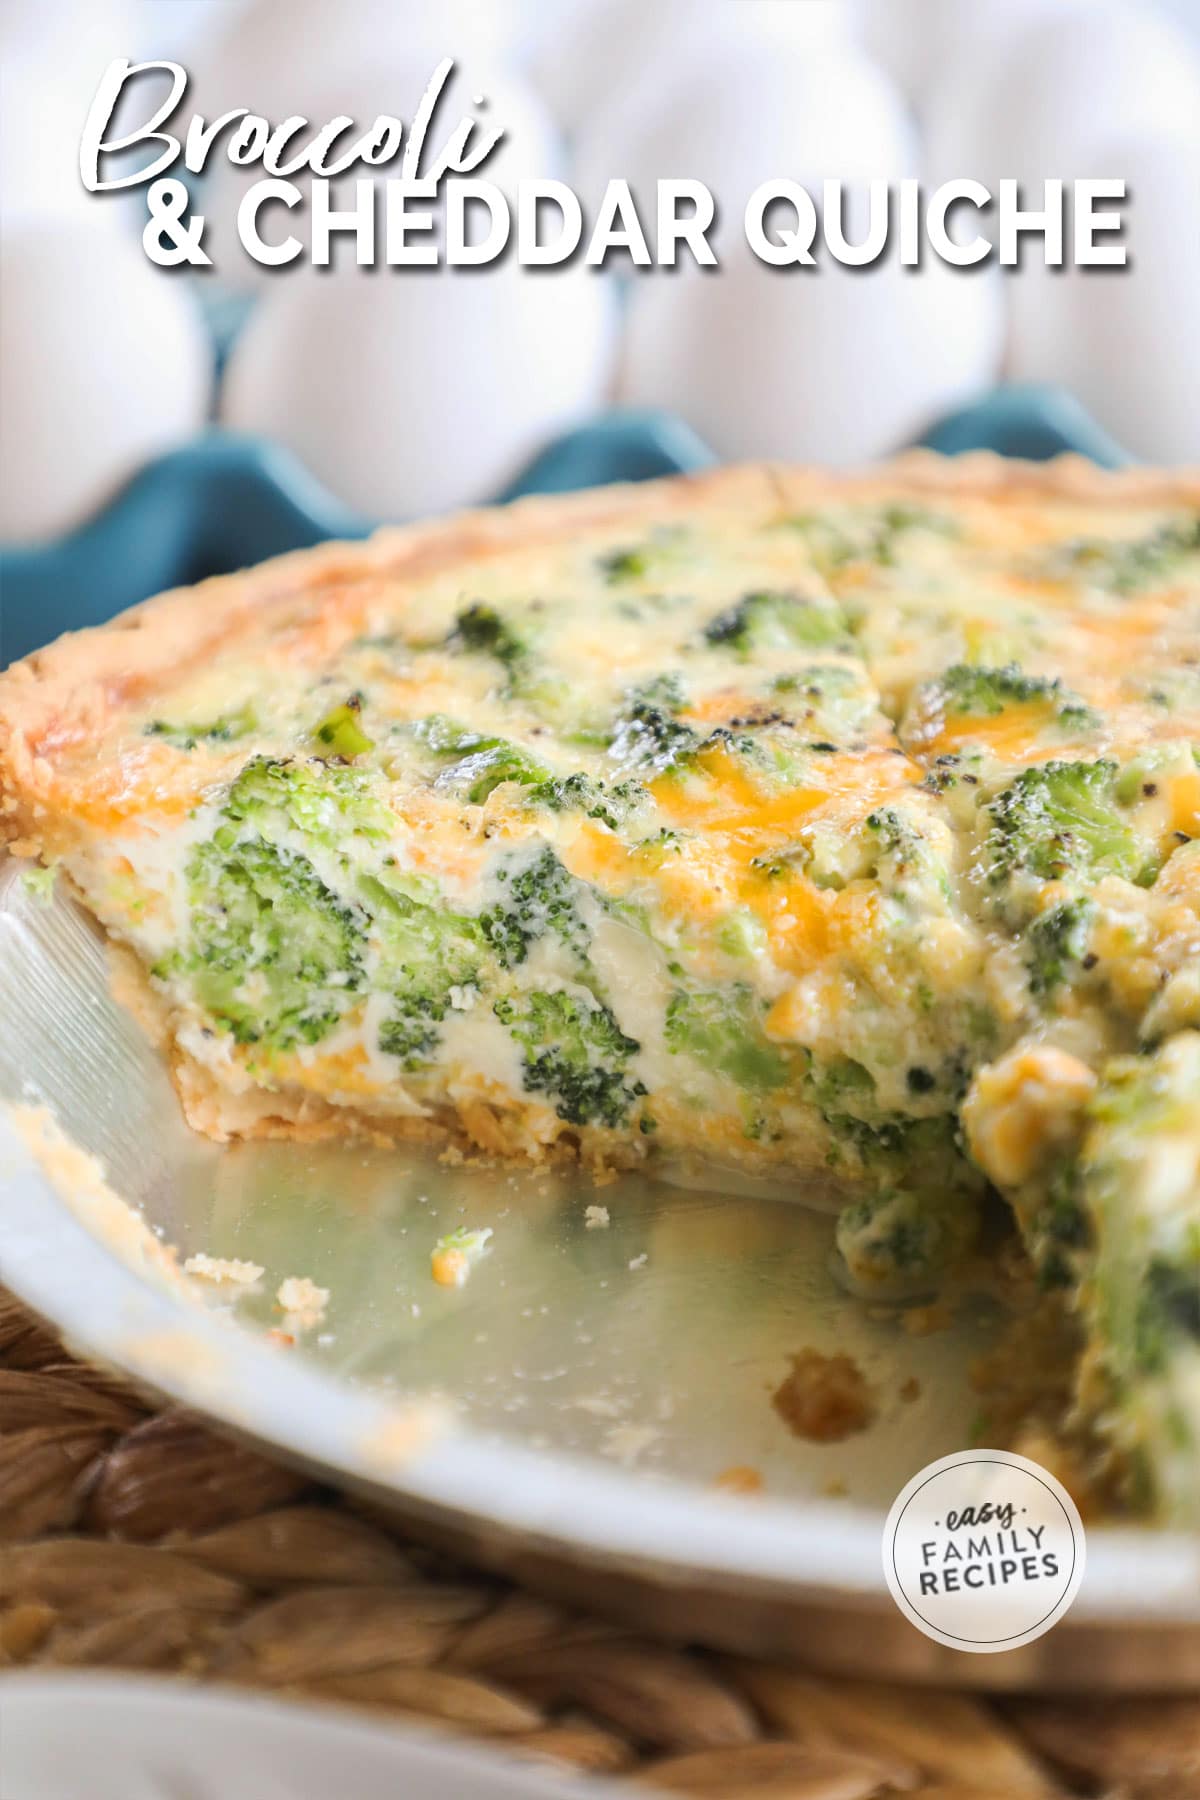 Close up image of quiche with a few slices taken out of it so you can see the inside packed with broccoli, cheese, and eggs.